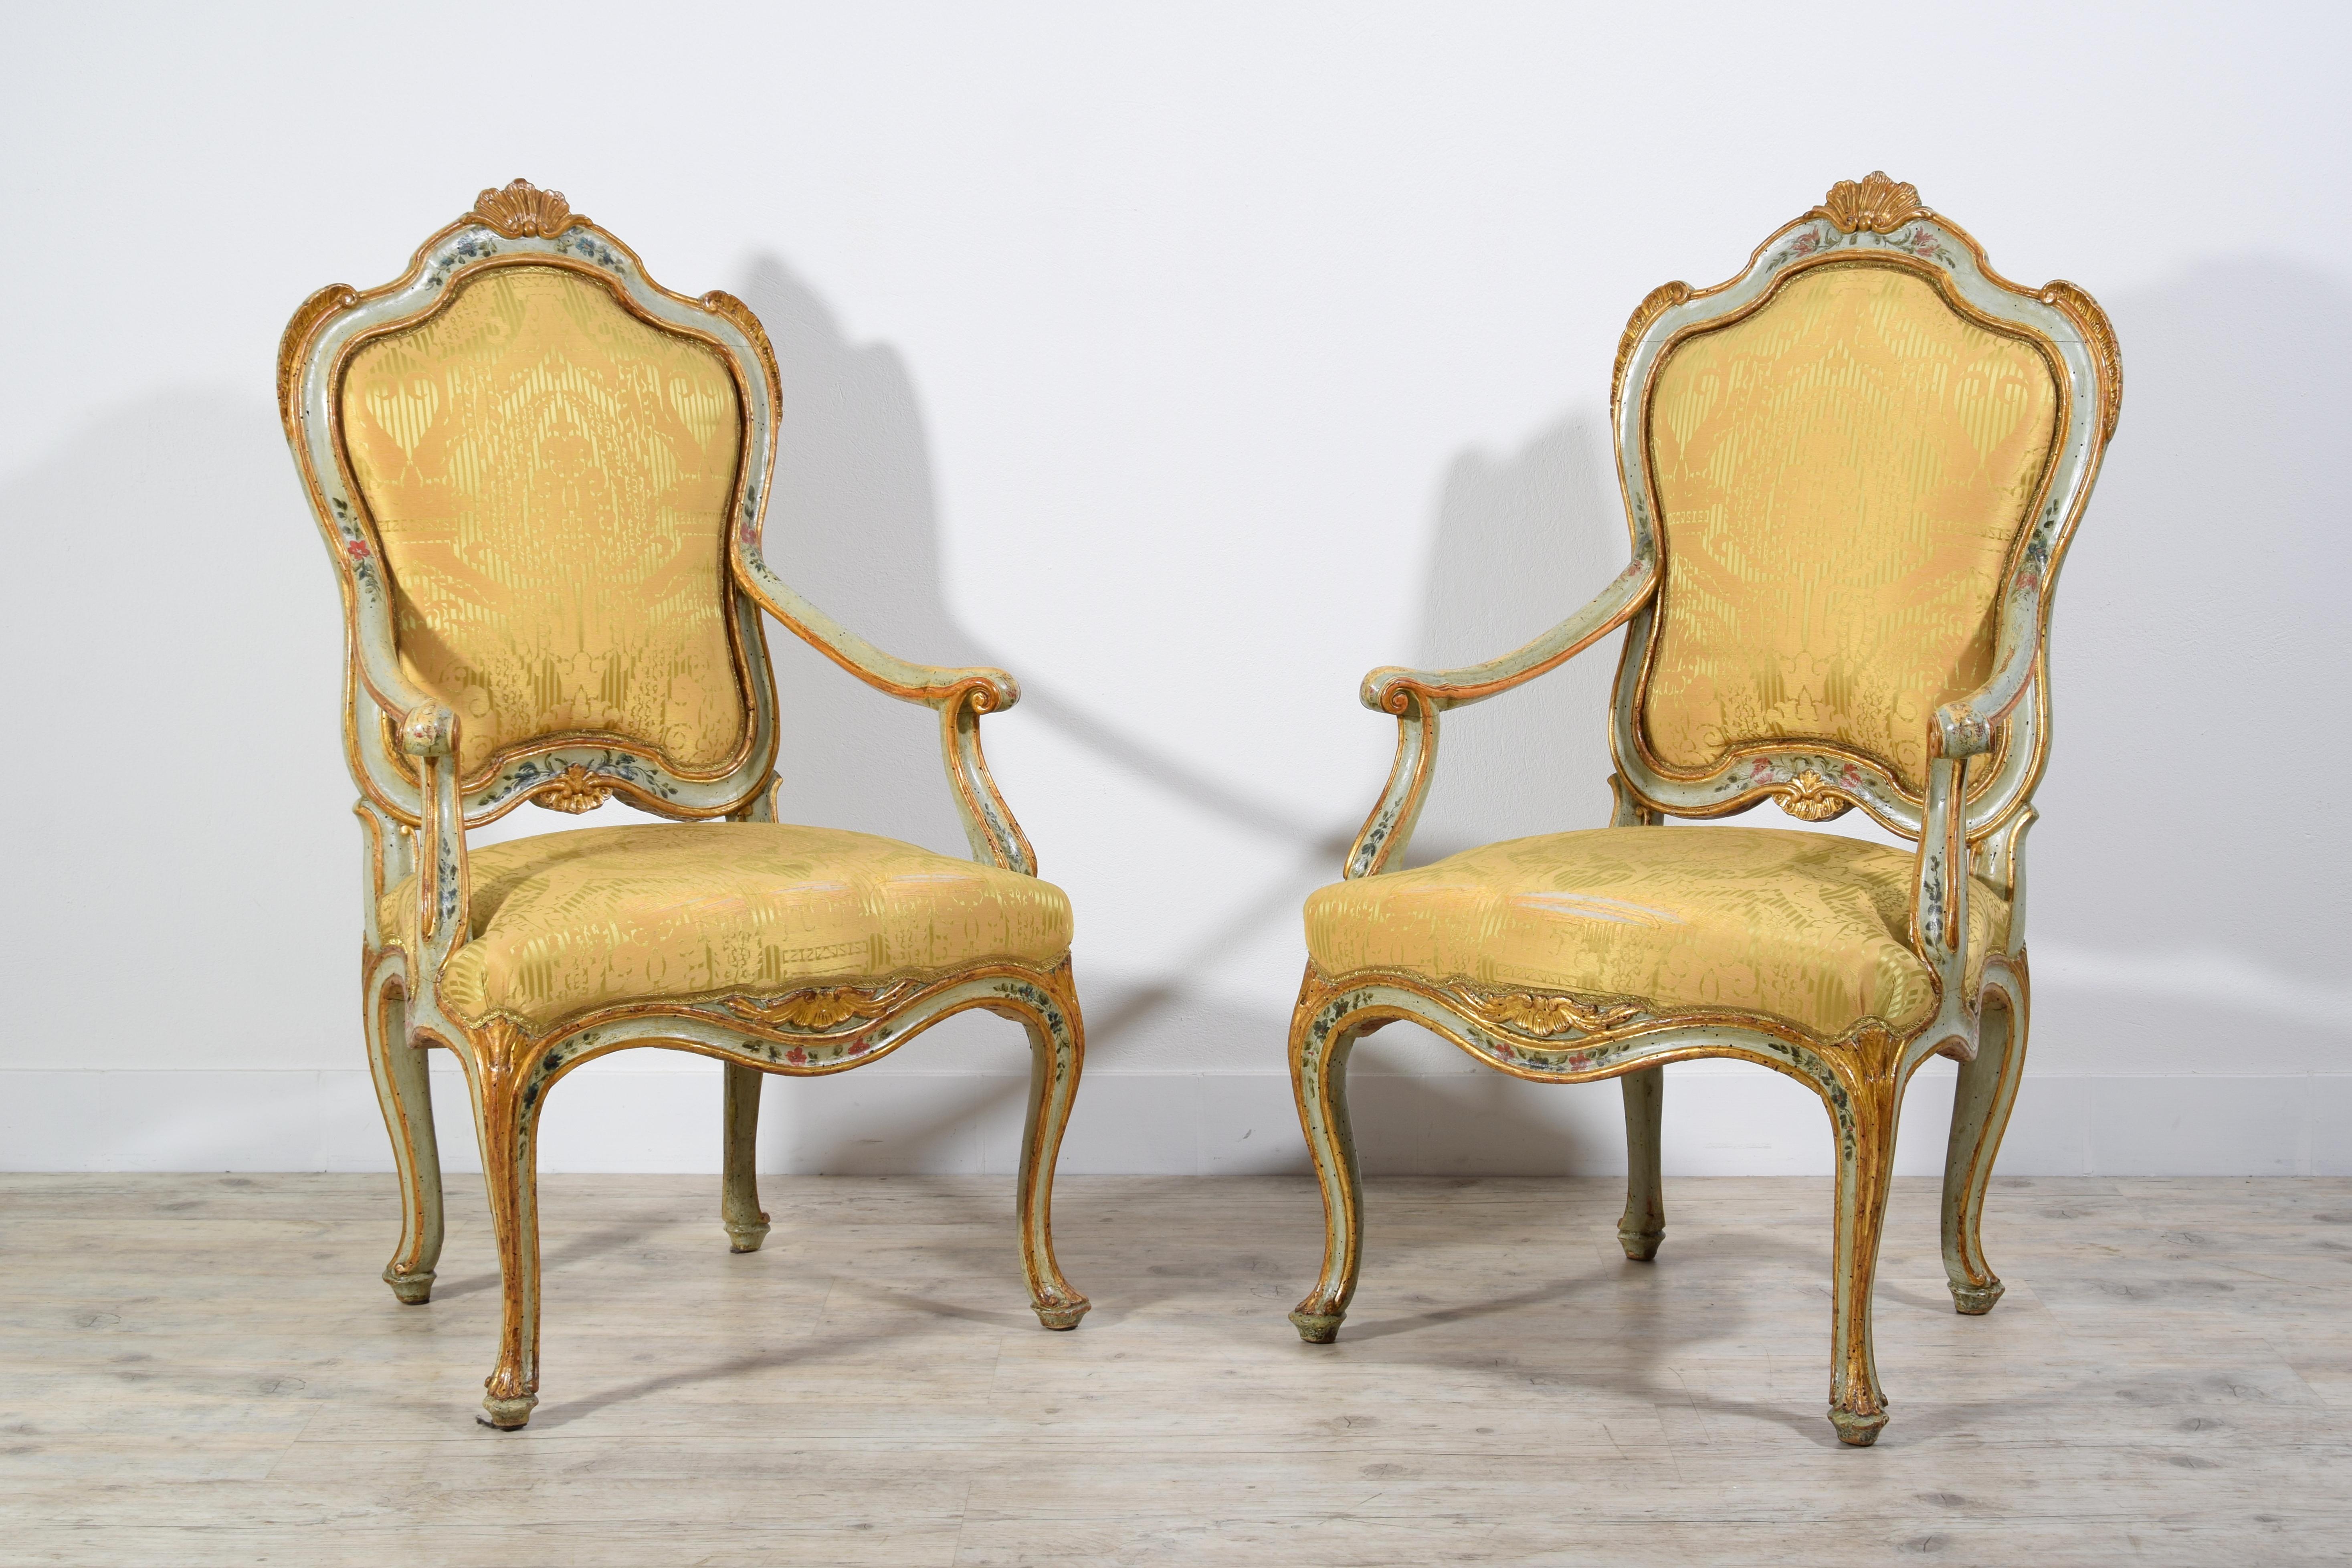 18th Century, Pair of Barocchetto Venetian Lacquered Giltwood Armchairs

This refined and important pair of armchairs was made around the middle of the 18th century in Venice, Italy, in carved, lacquered and gilded wood and reflects the typical